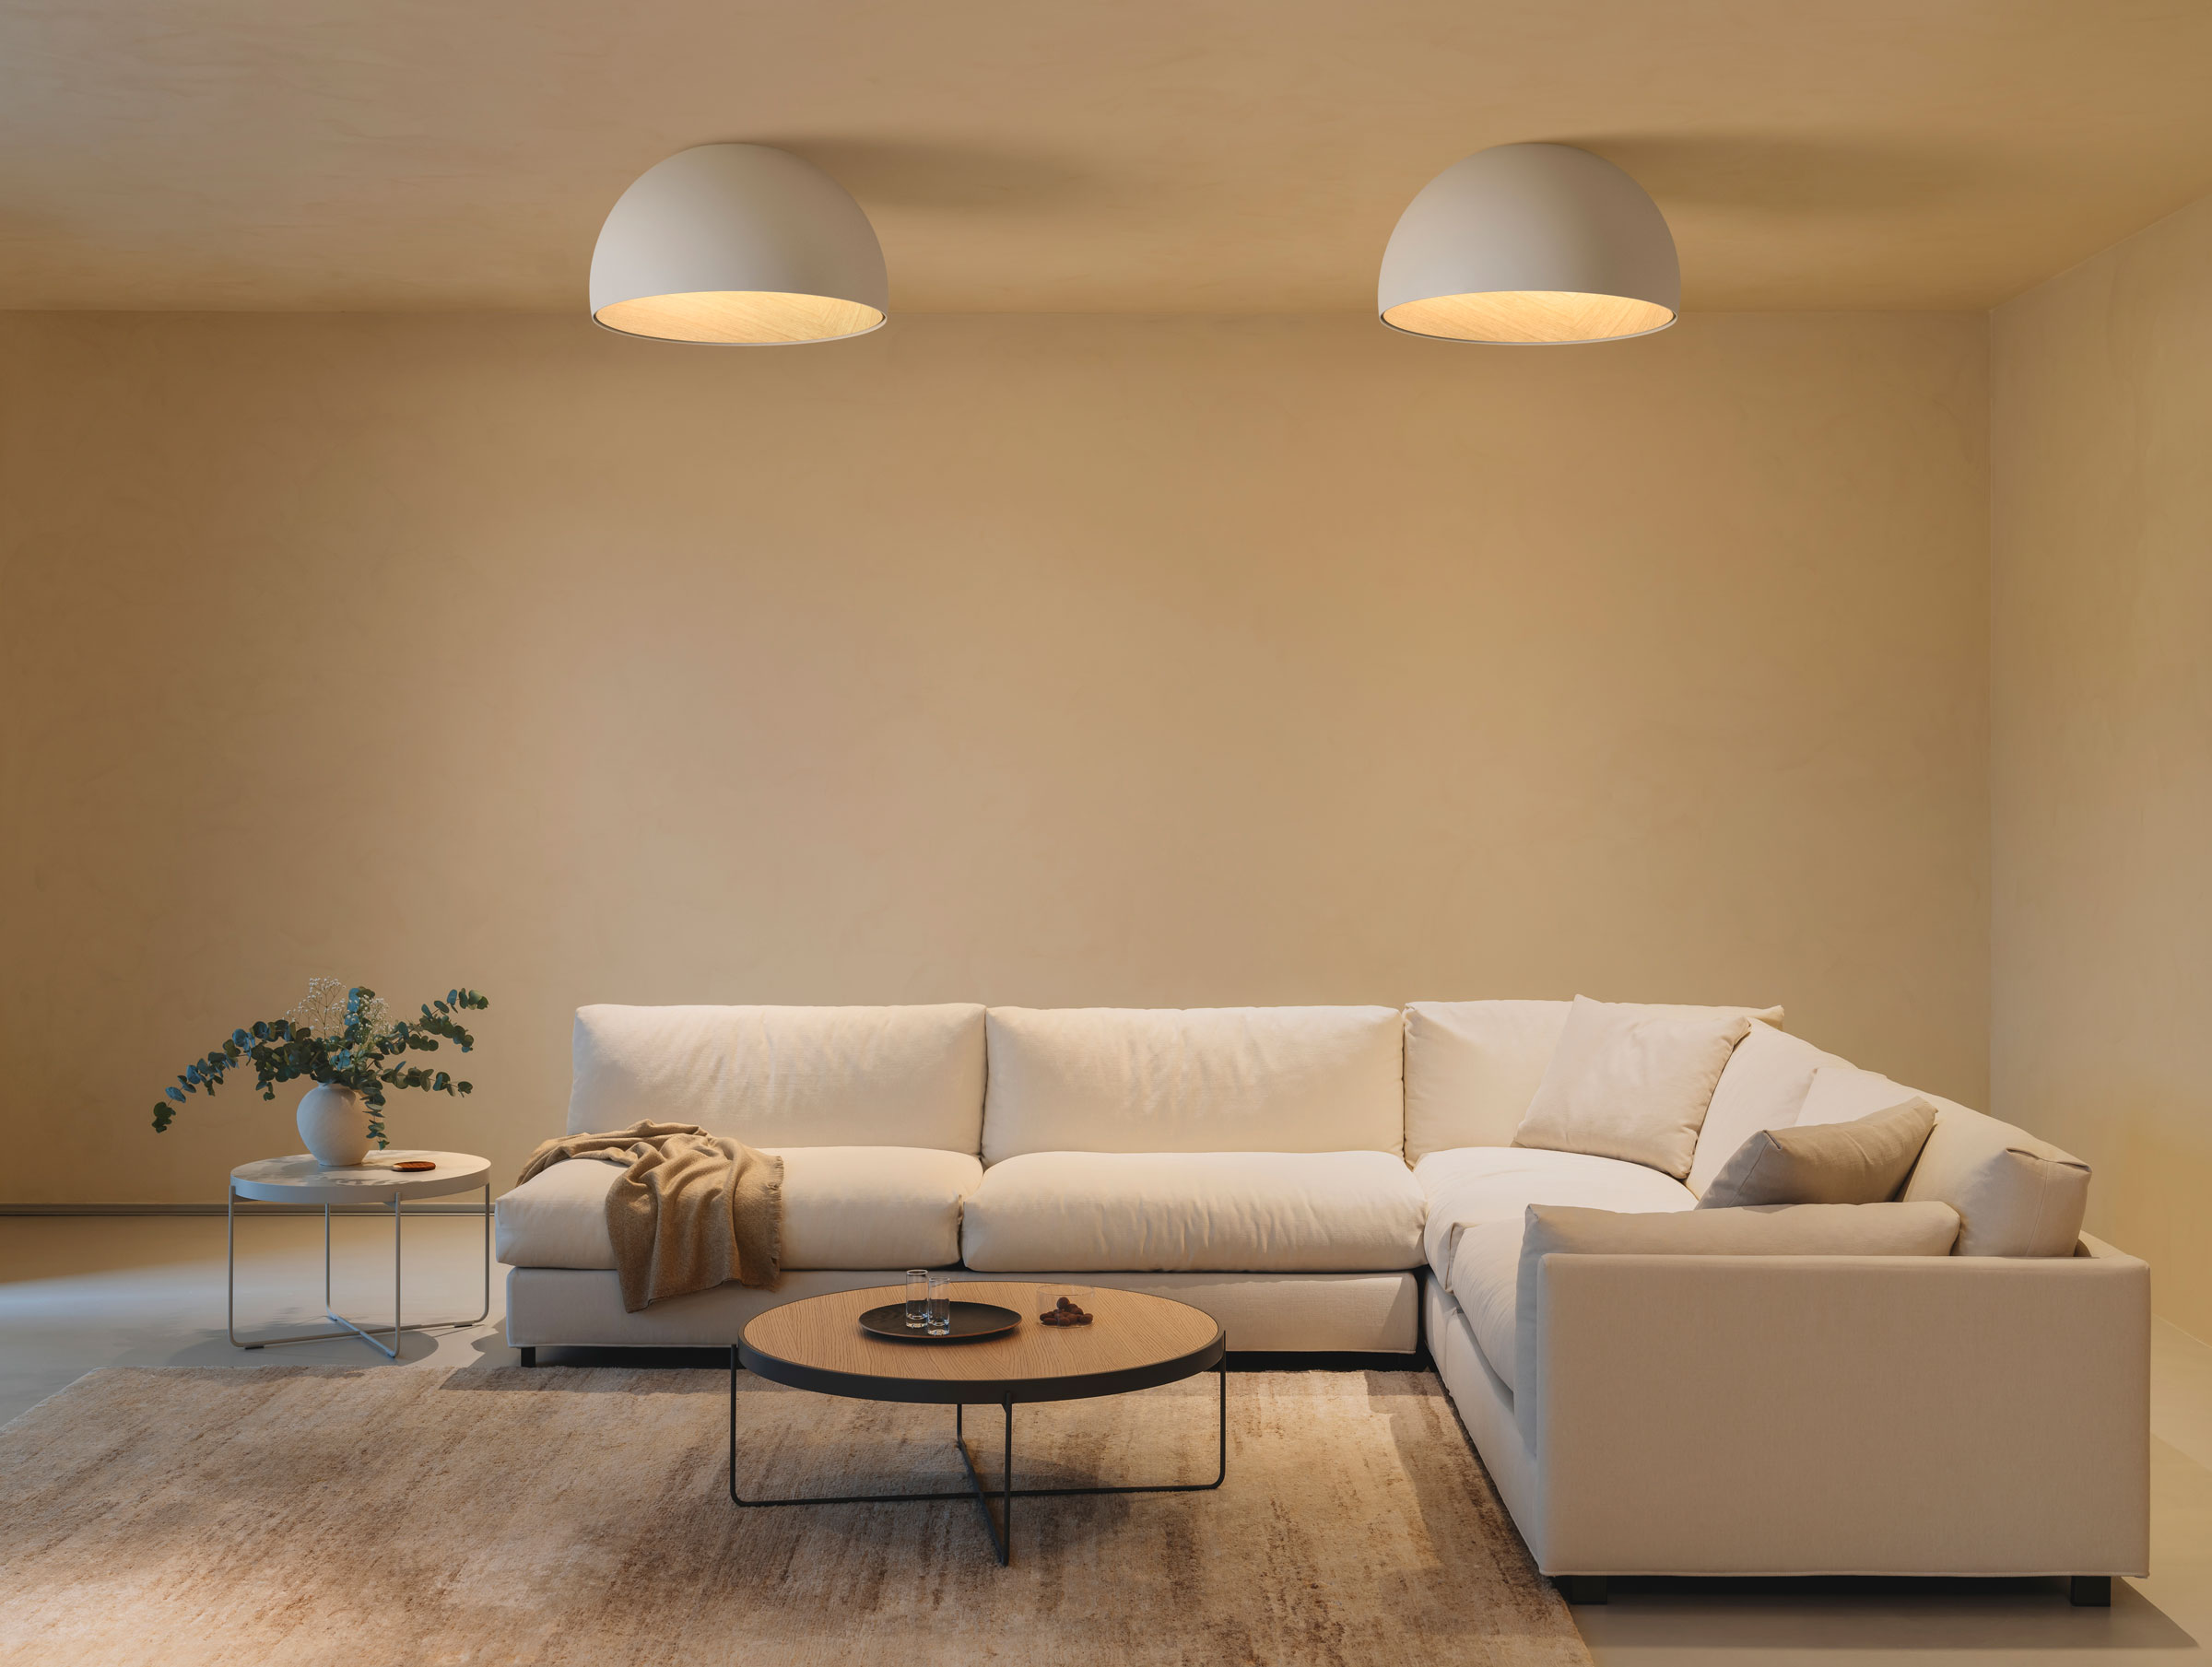 Vibia The Edit - Atmospheres designed for winter wellbeing - Duo